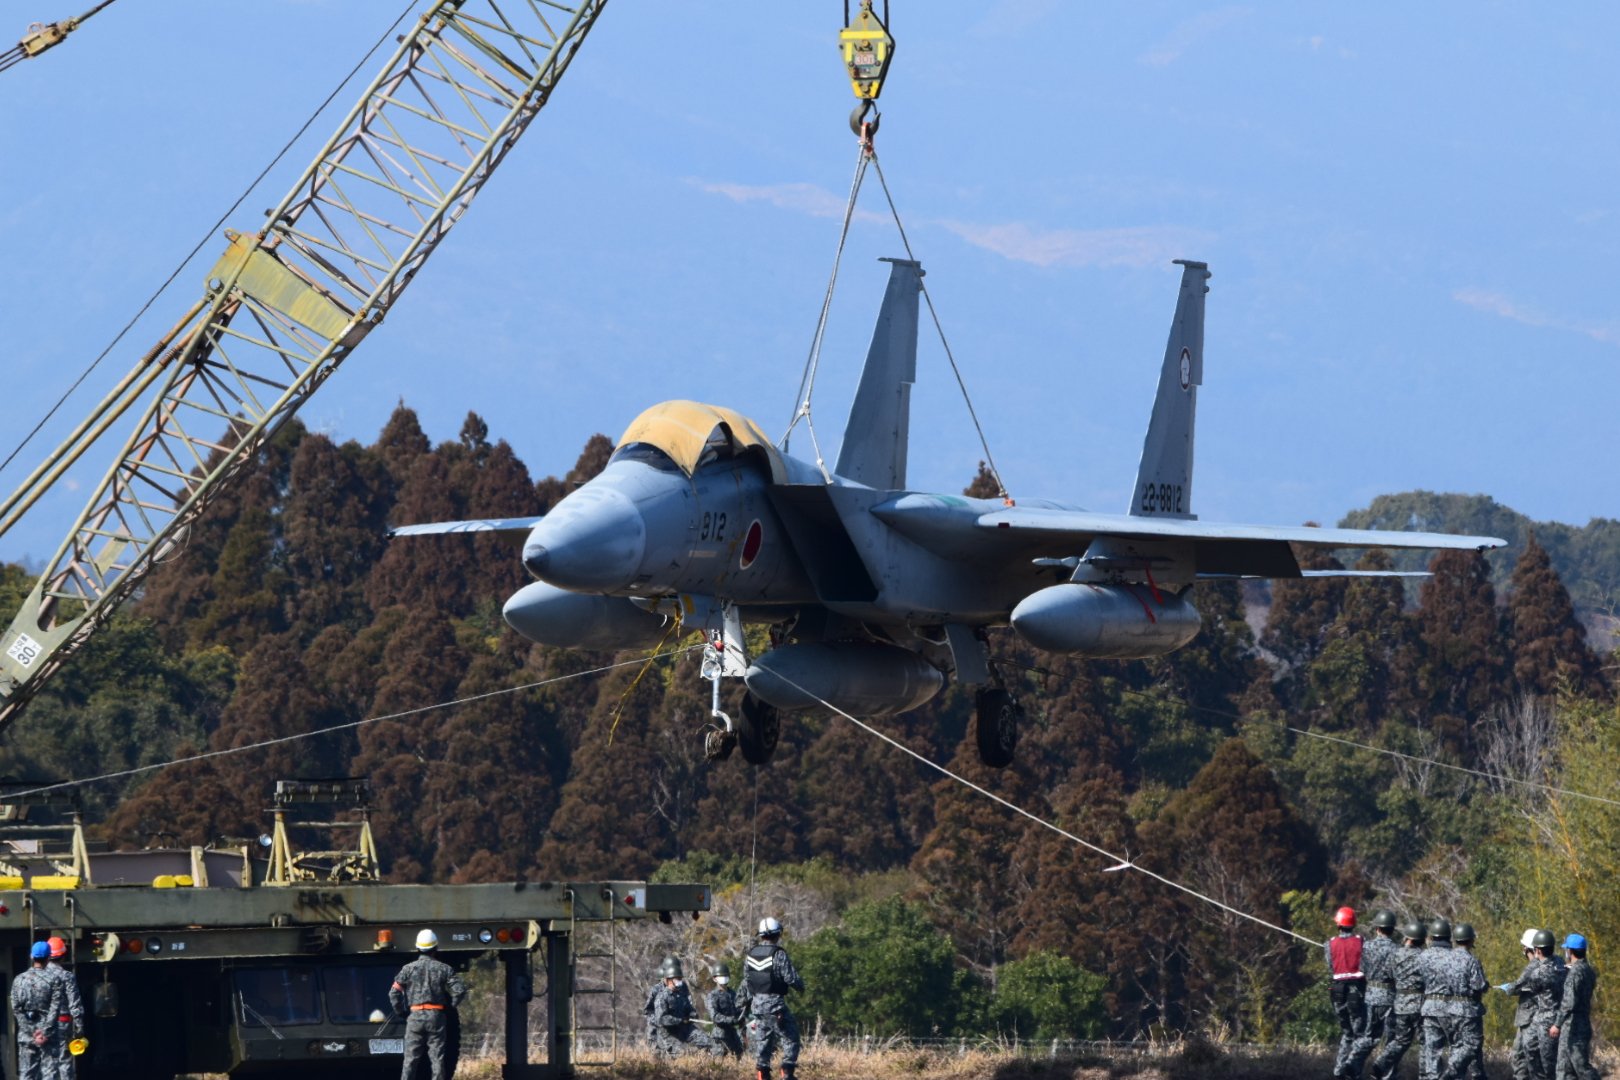 Aircraft revolt: Japanese F-15J fighter wanted to flee an airbase during an alert